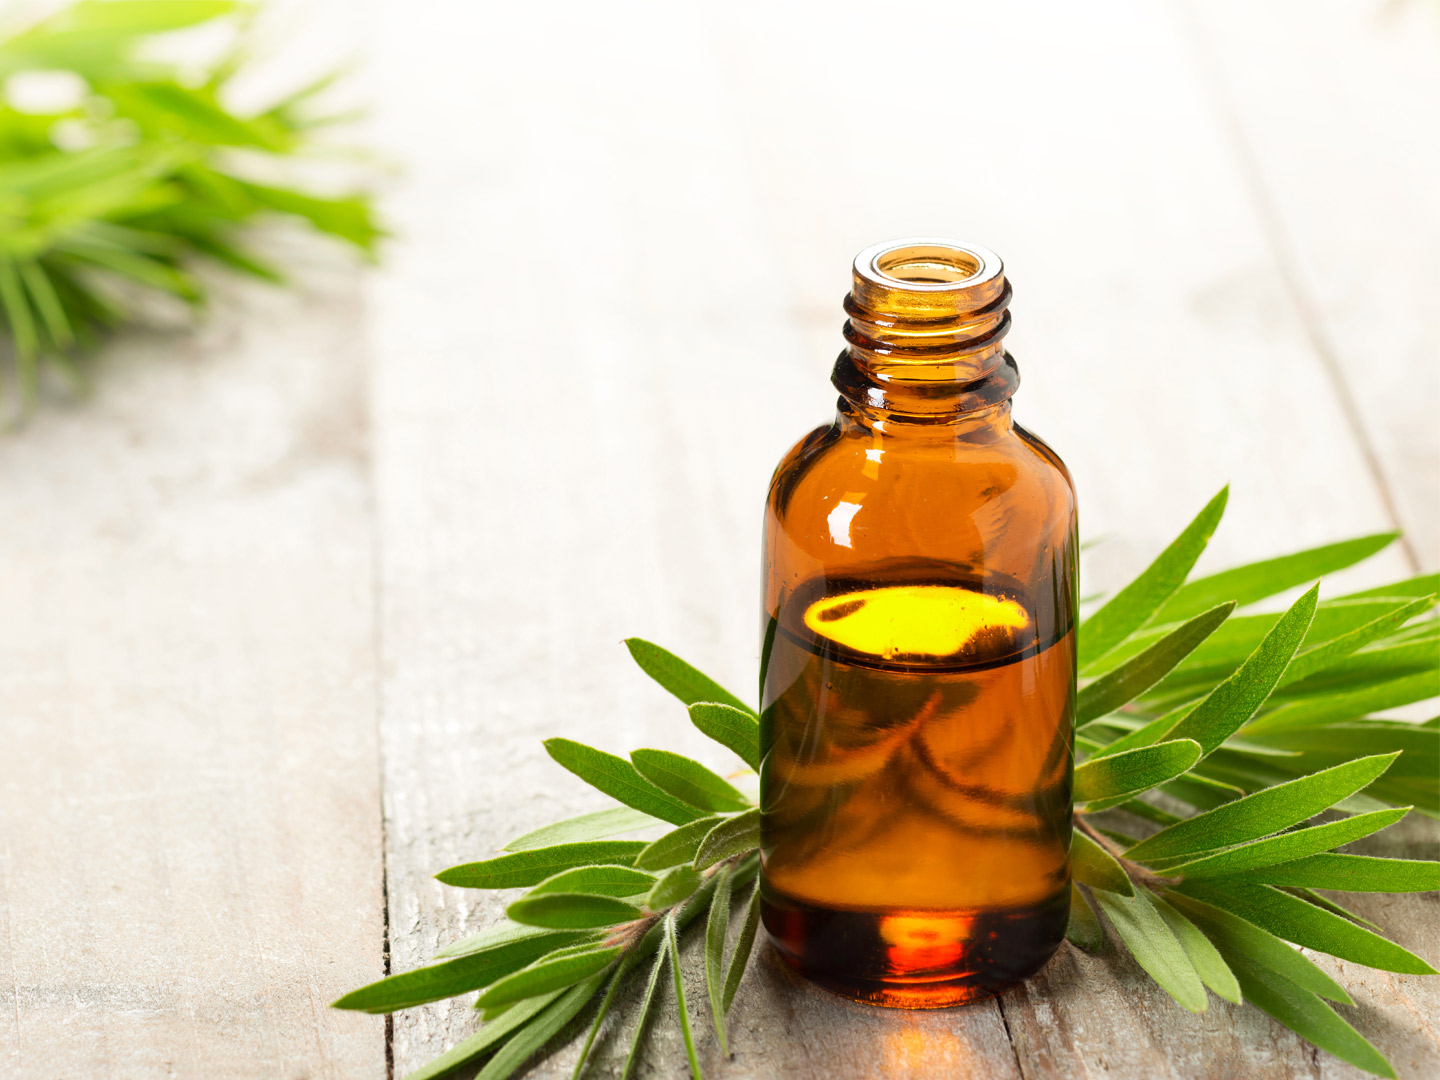 Do You Use Tea Tree Oil? Some Reasons You May Want To